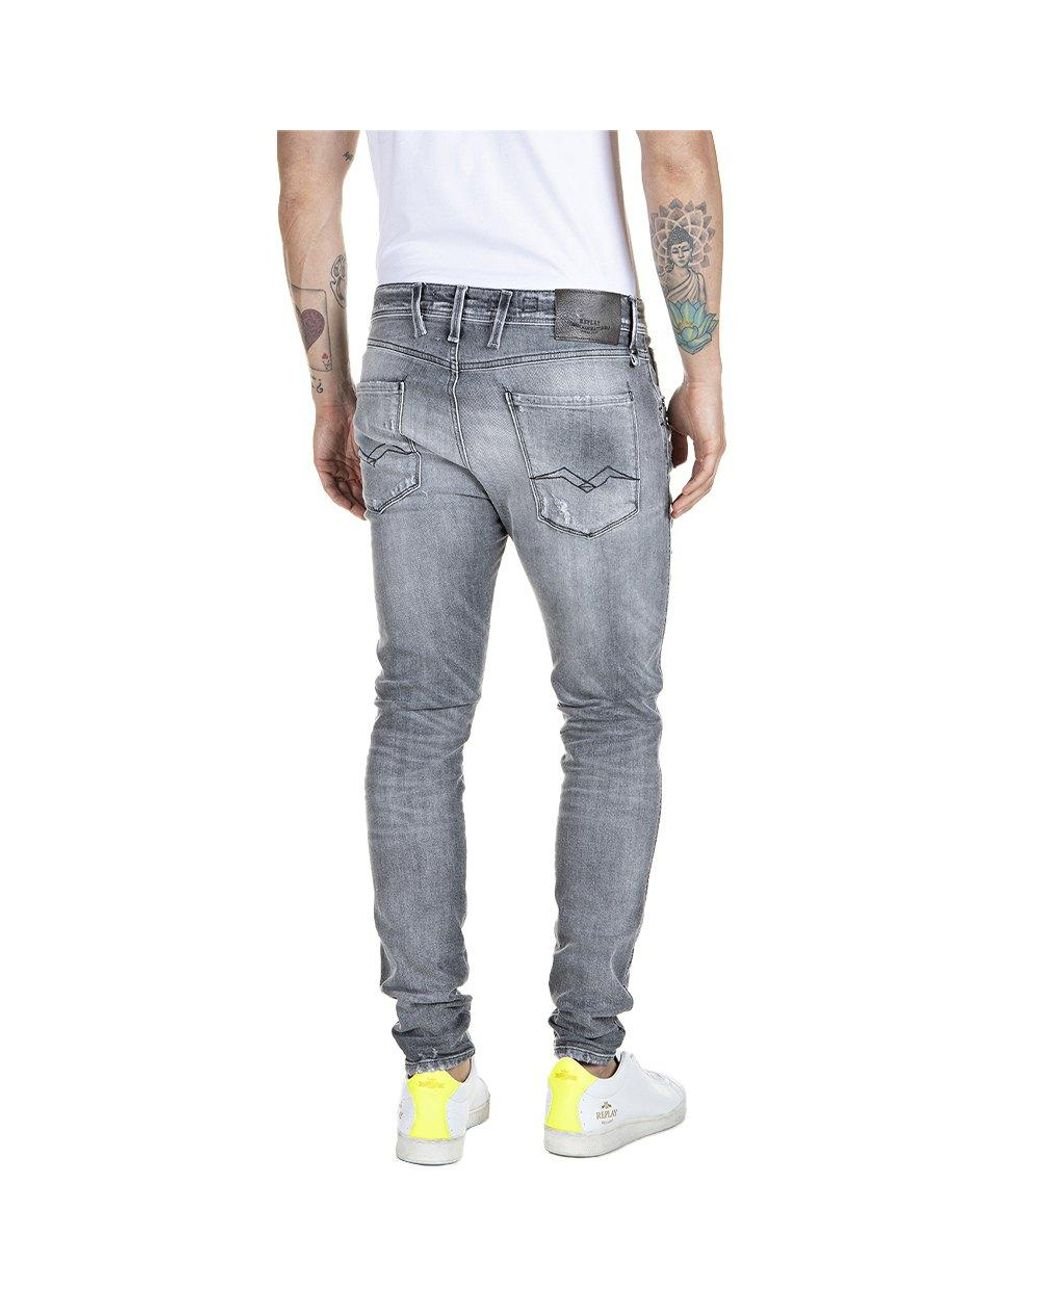 Replay Men's Gray Ma934q.000.199.244 Jeans